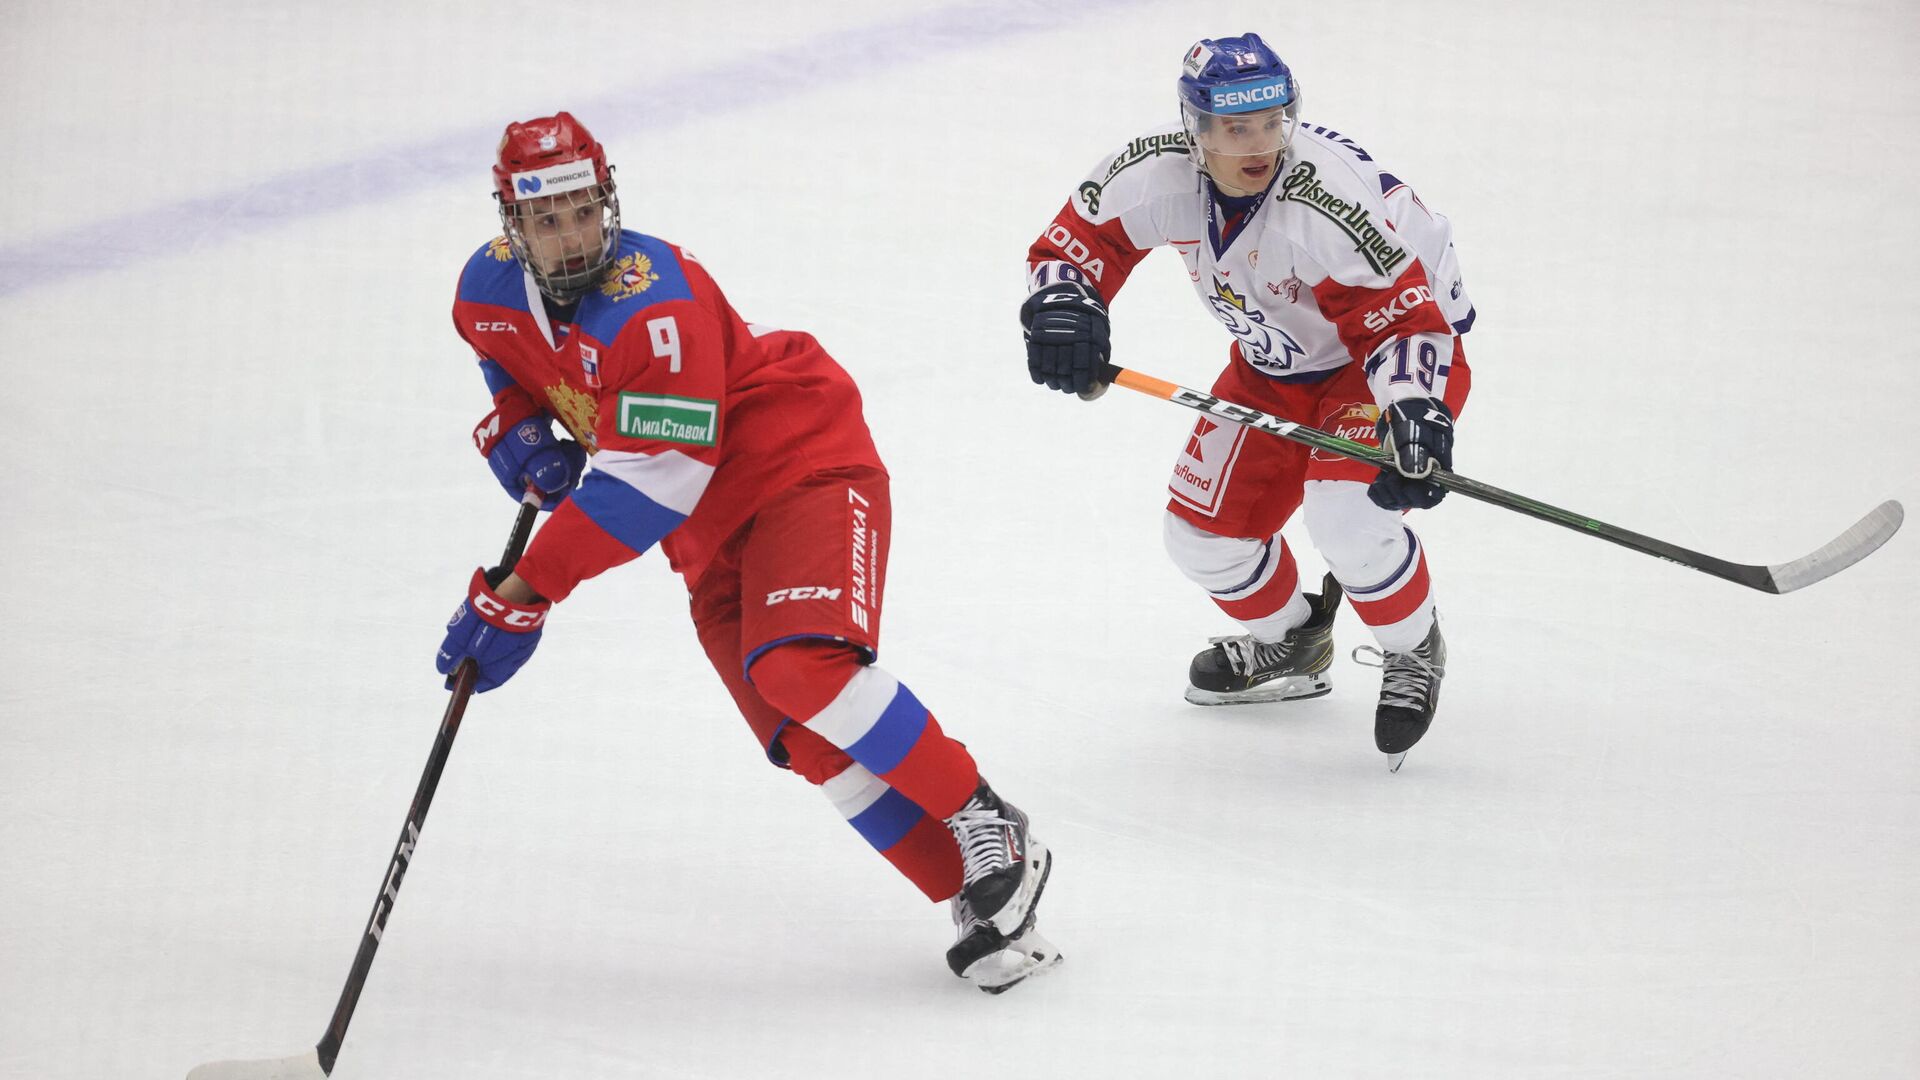 Russia's Nikita Chibrikov (L) and Czech Republic's Petr Kodytek  during Euro Hockey Tour between Russia and Czech Republic on February 14, 2021, at Malmoe Arena in Sweden. (Photo by Andreas HILLERGREN / TT NEWS AGENCY / AFP) / Sweden OUT - РИА Новости, 1920, 14.02.2021